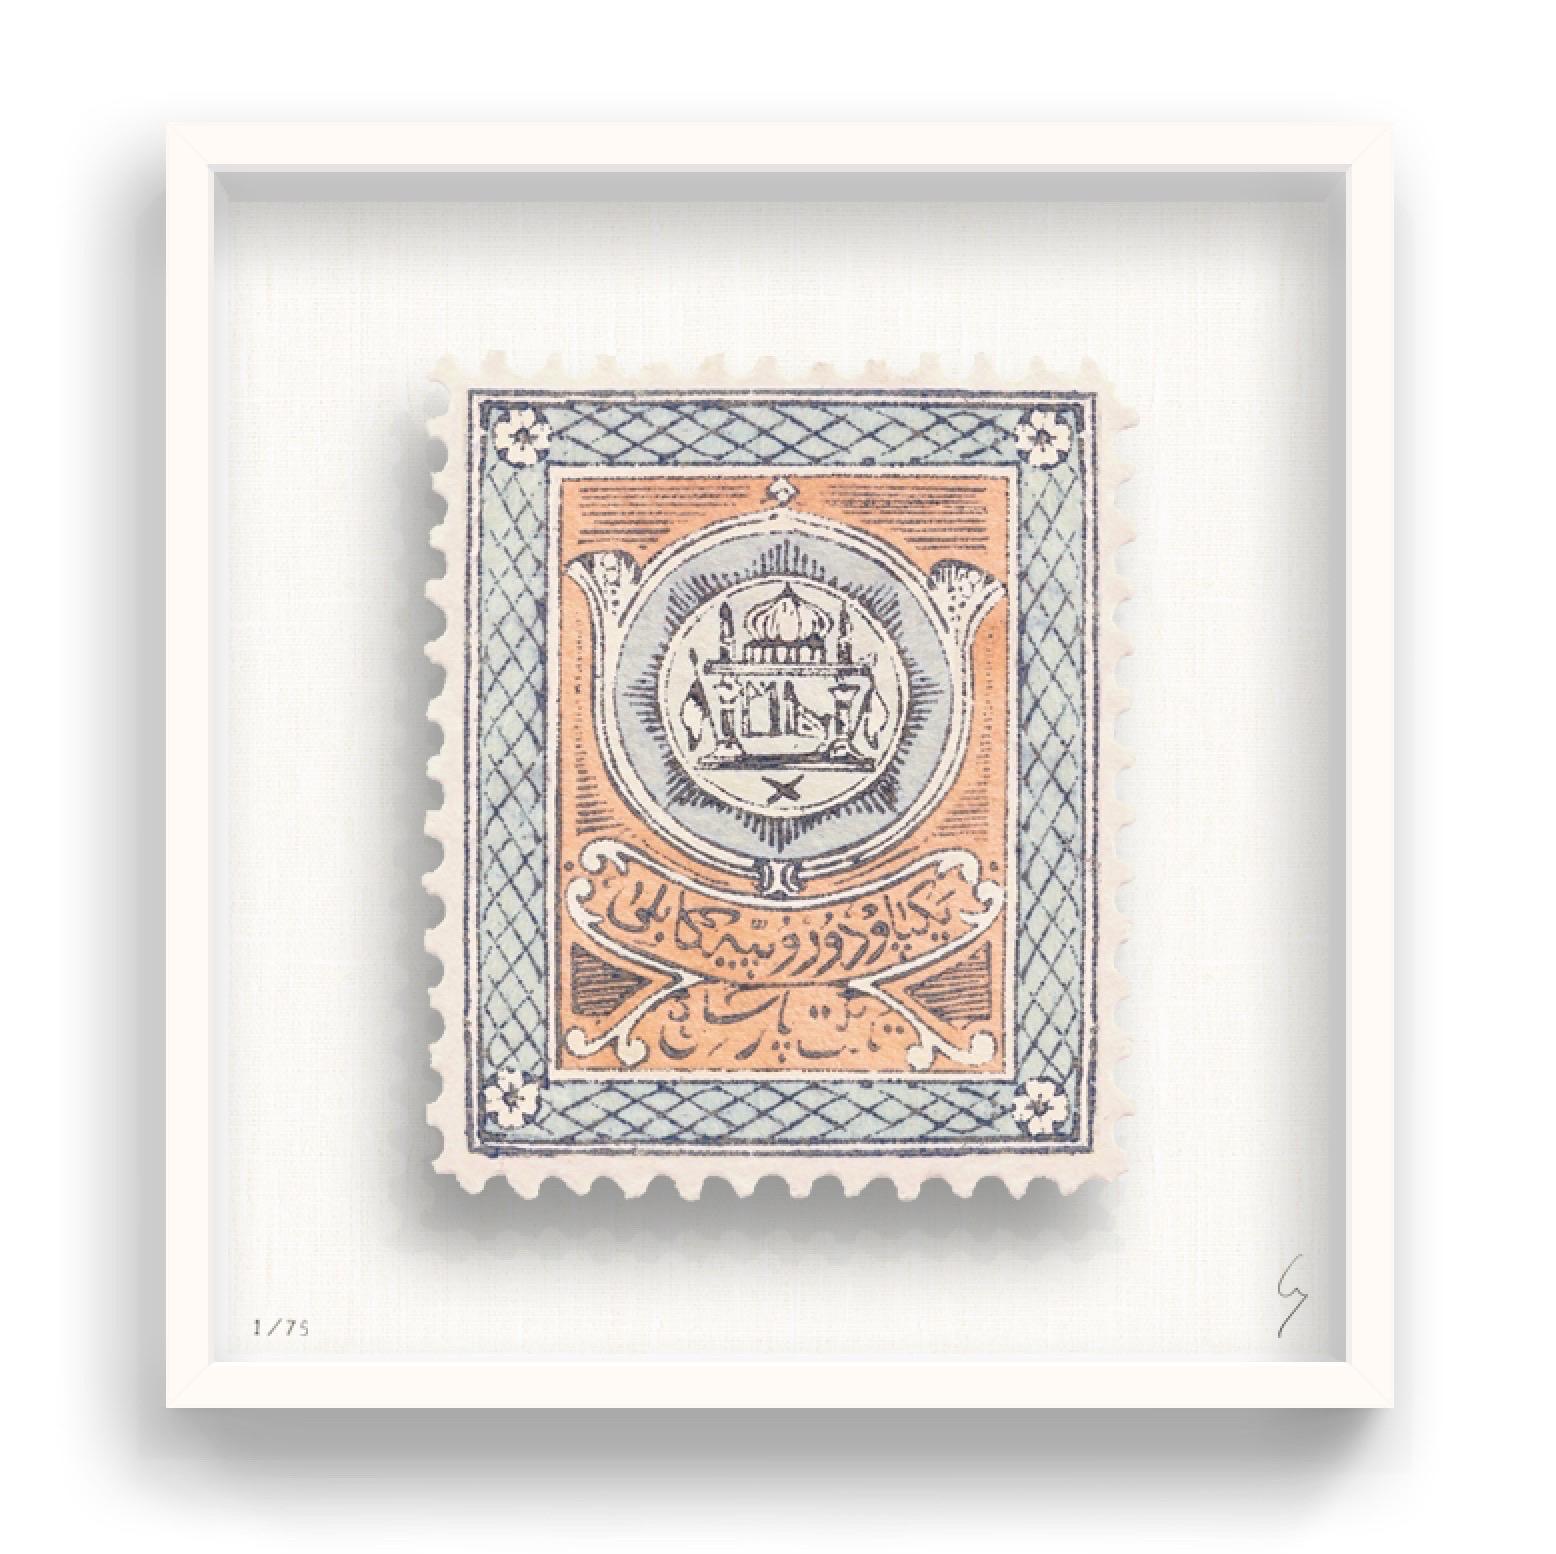 Guy Gee, Afghanistan  (medium)

Hand-engraved print on 350gsm on G.F Smith card
53 x 56cm (20 4/5 x 22 2/5 in)
Frame included 
Edition of 75 

Each artwork by Guy had been digitally reimagined from an original postage stamp. Cut out and finished by